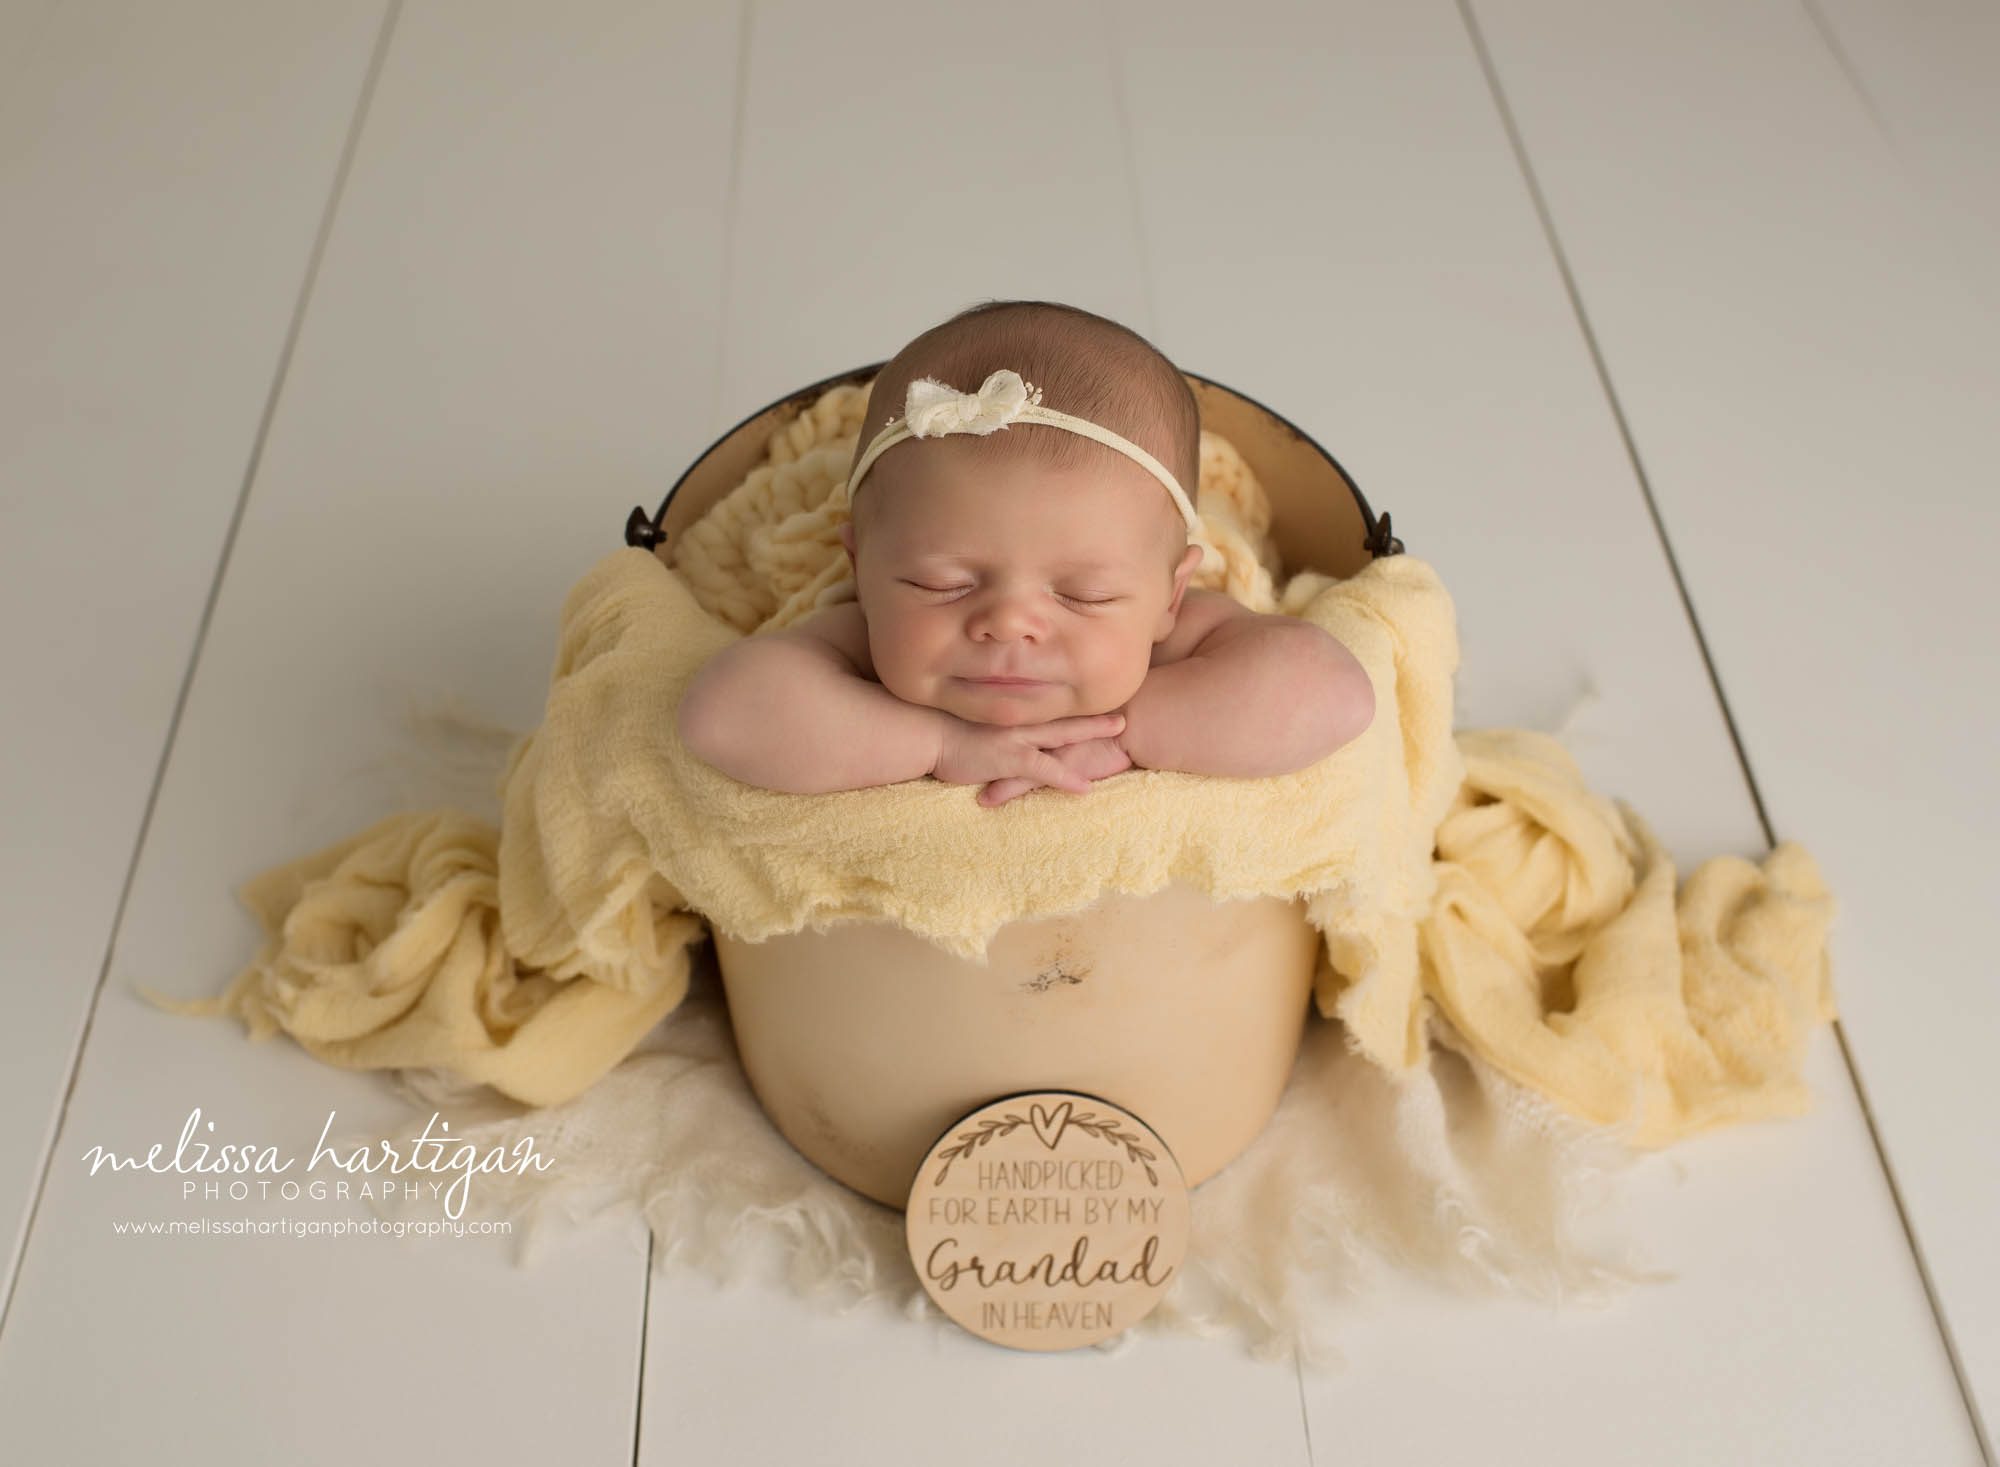 newborn baby girl posed in bucket with yellow draping and special message carved into wooden plaque CT newborn photography Amston CT